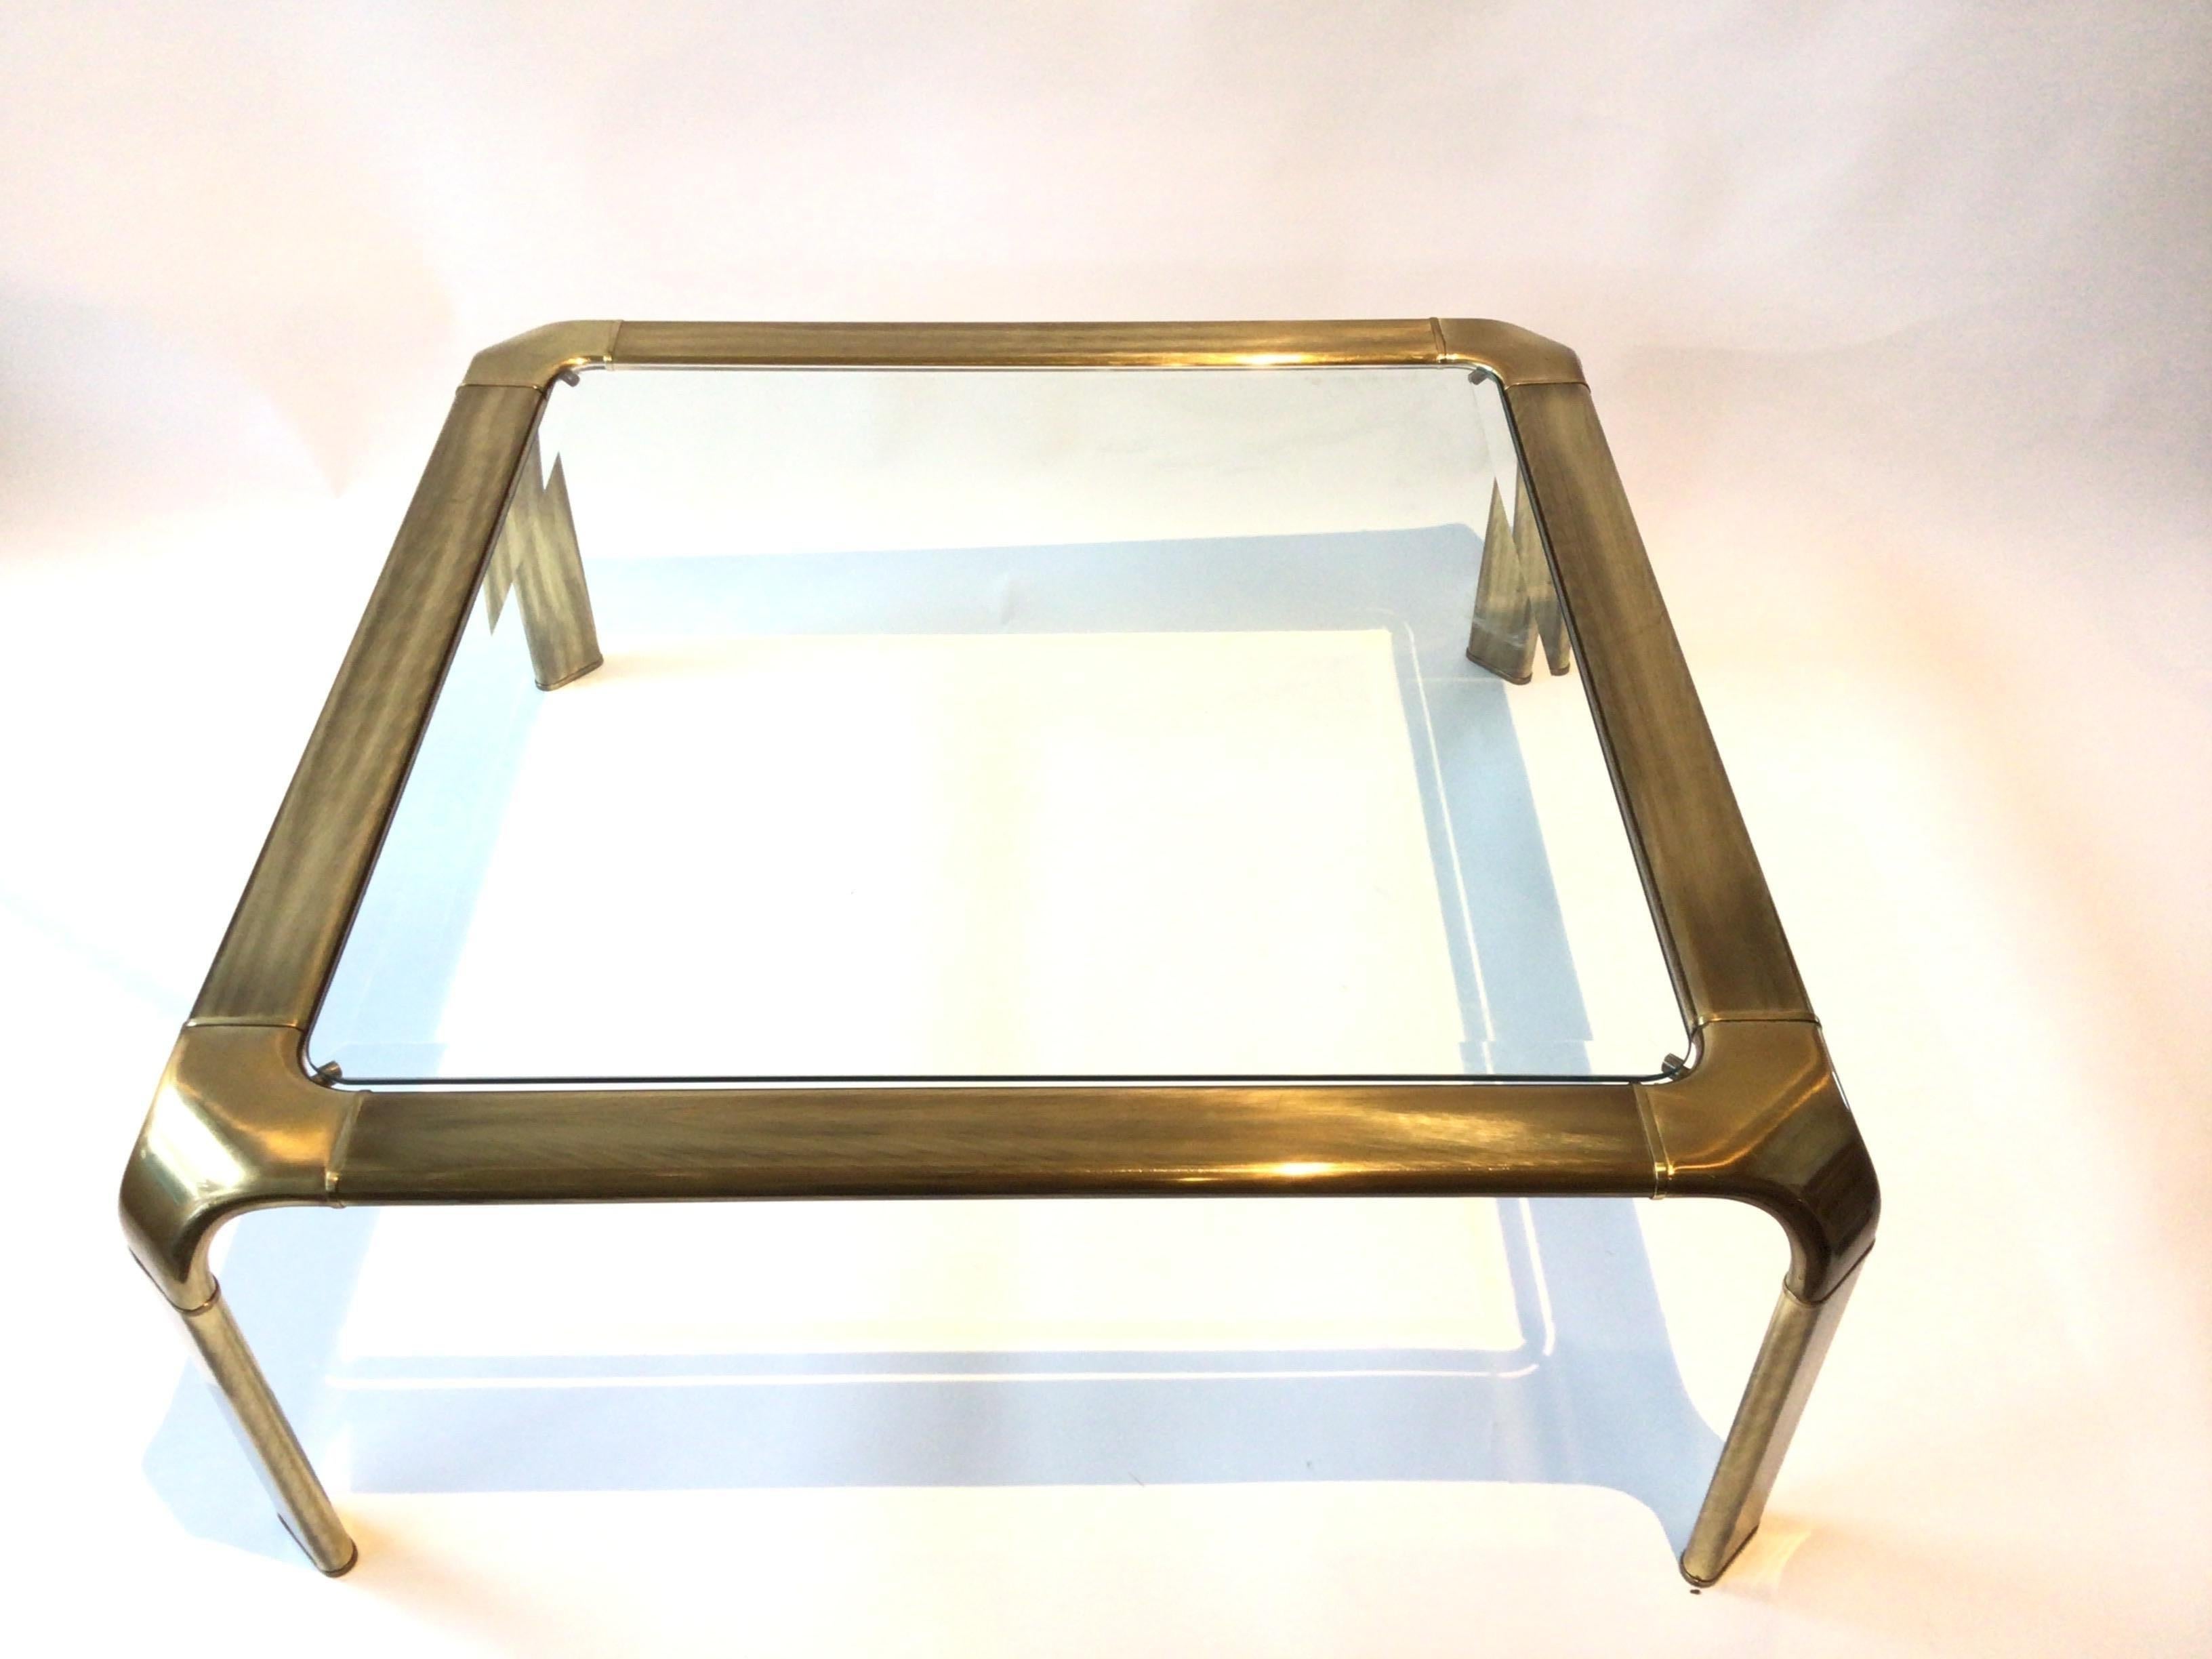 1970s Brass and glass Mastercraft square coffee table.